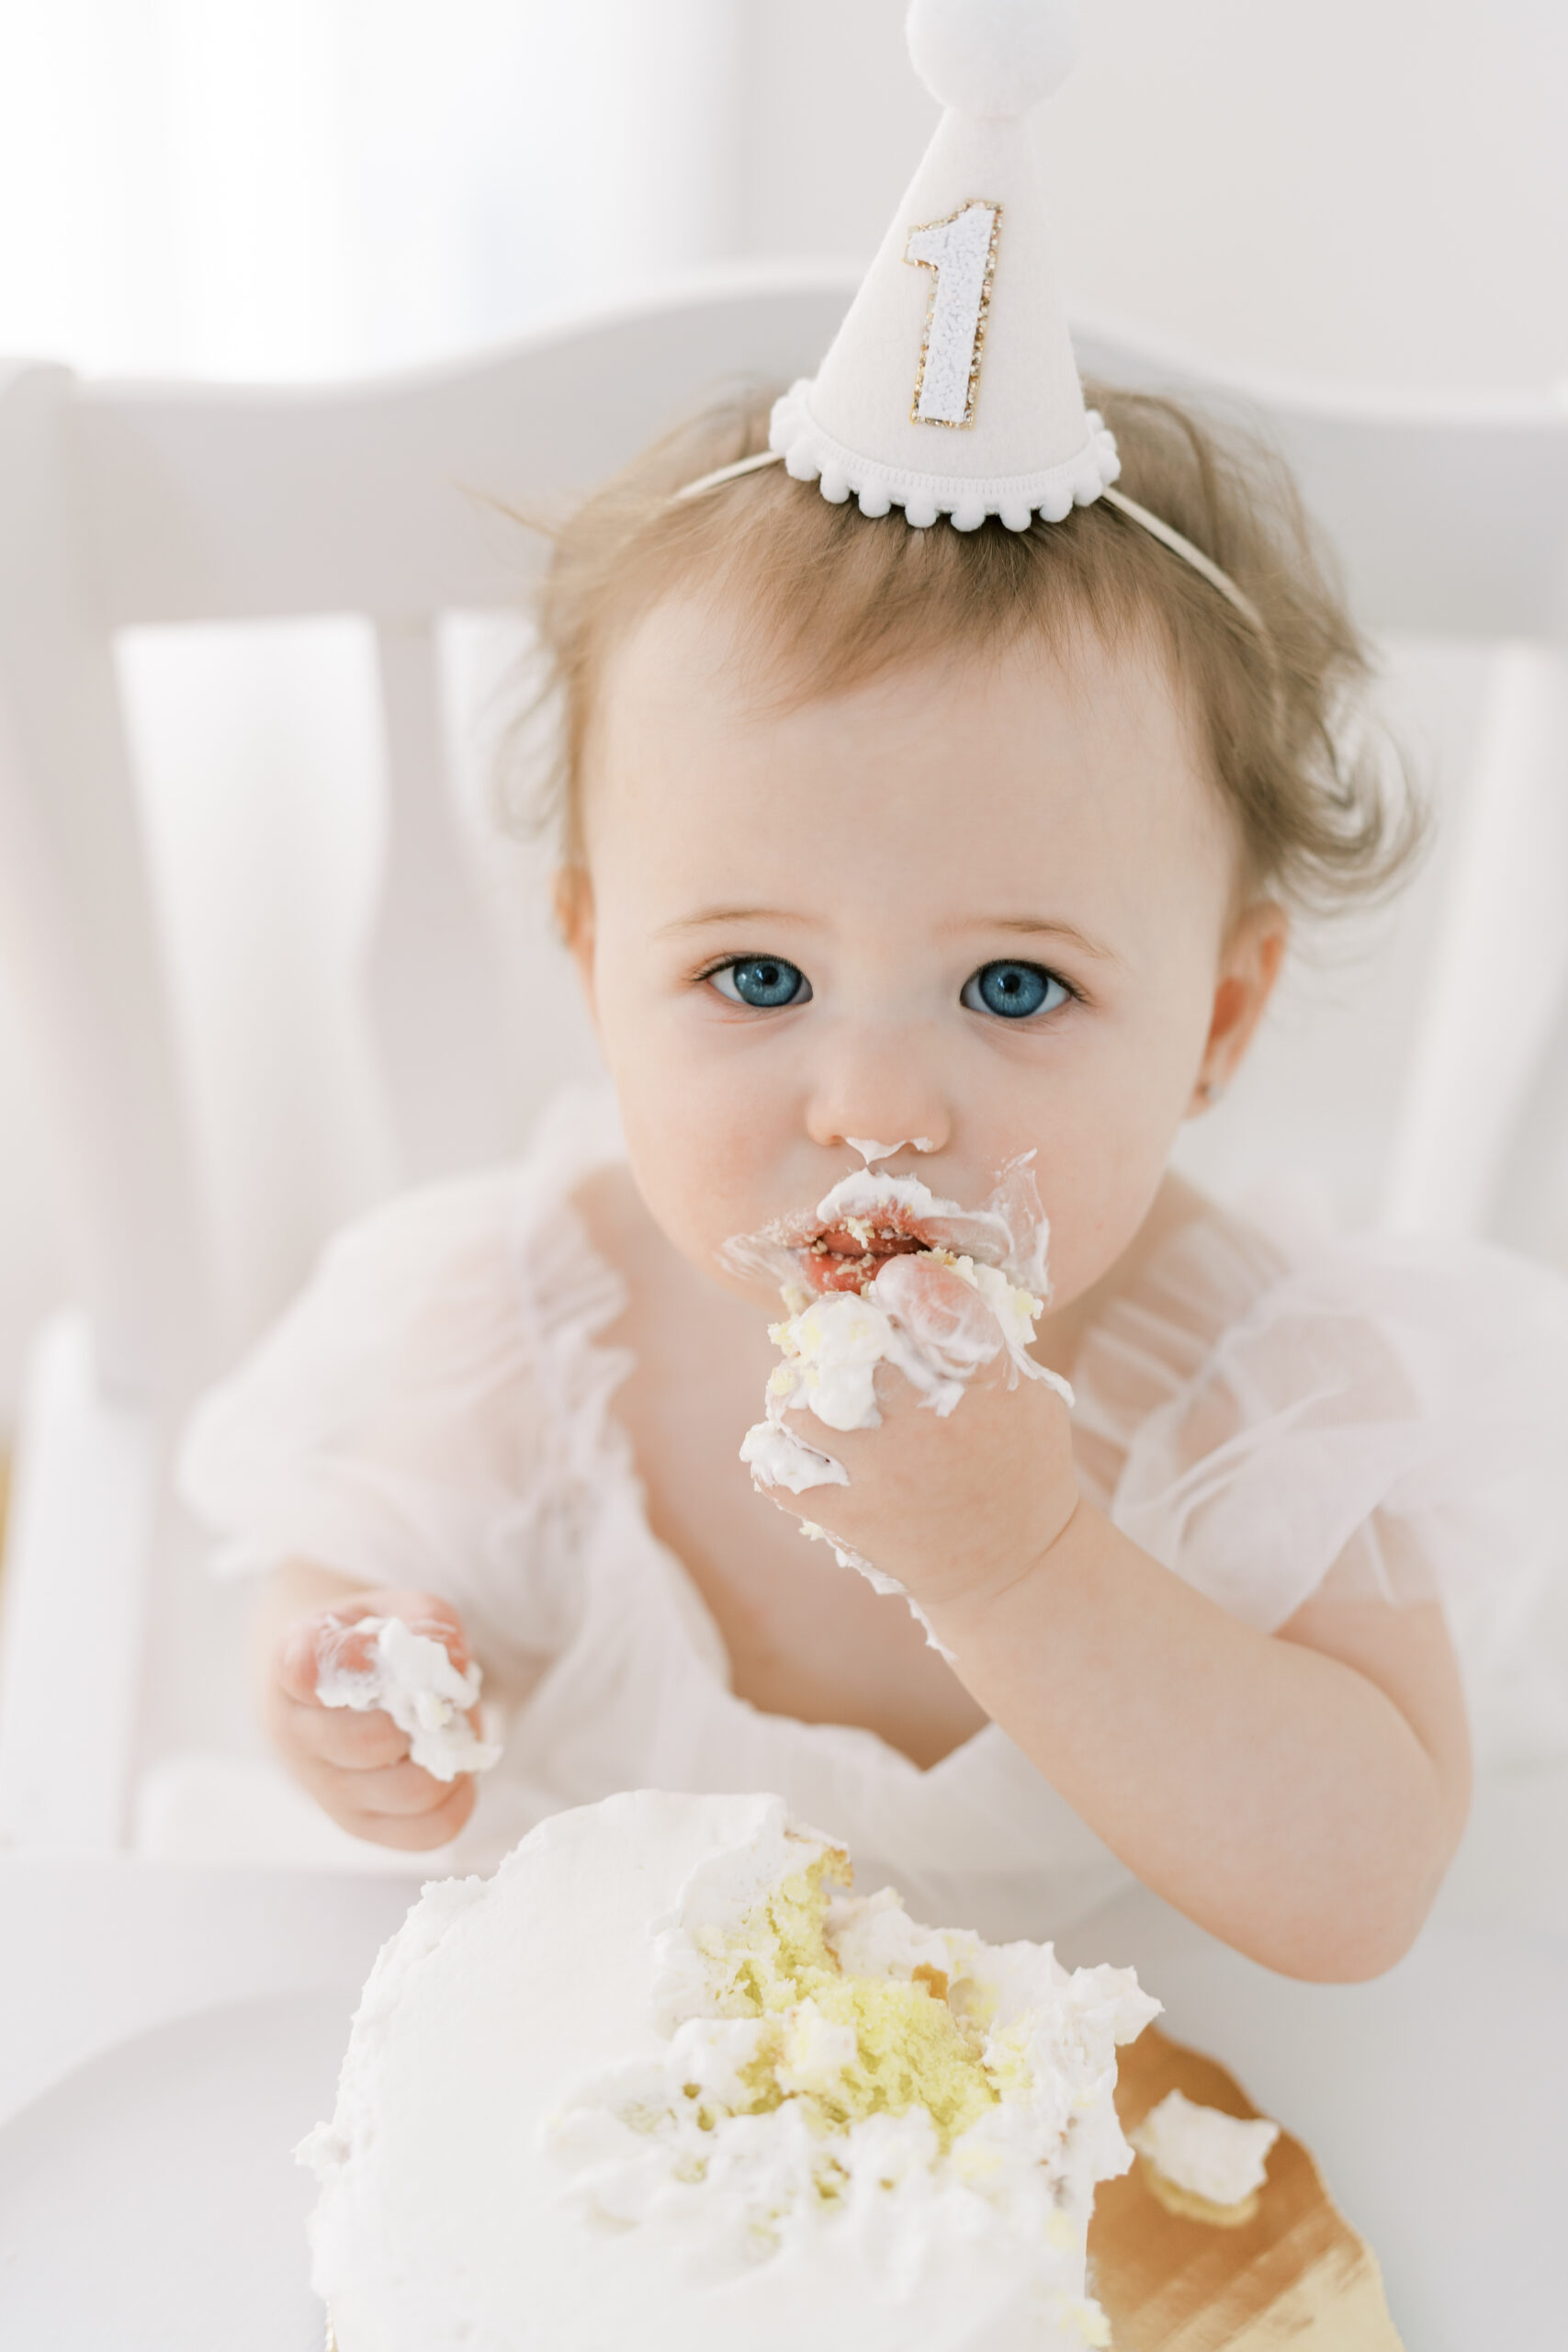 A little girl with blonde hair wearing a white birthday hat eating a vanilla cake.